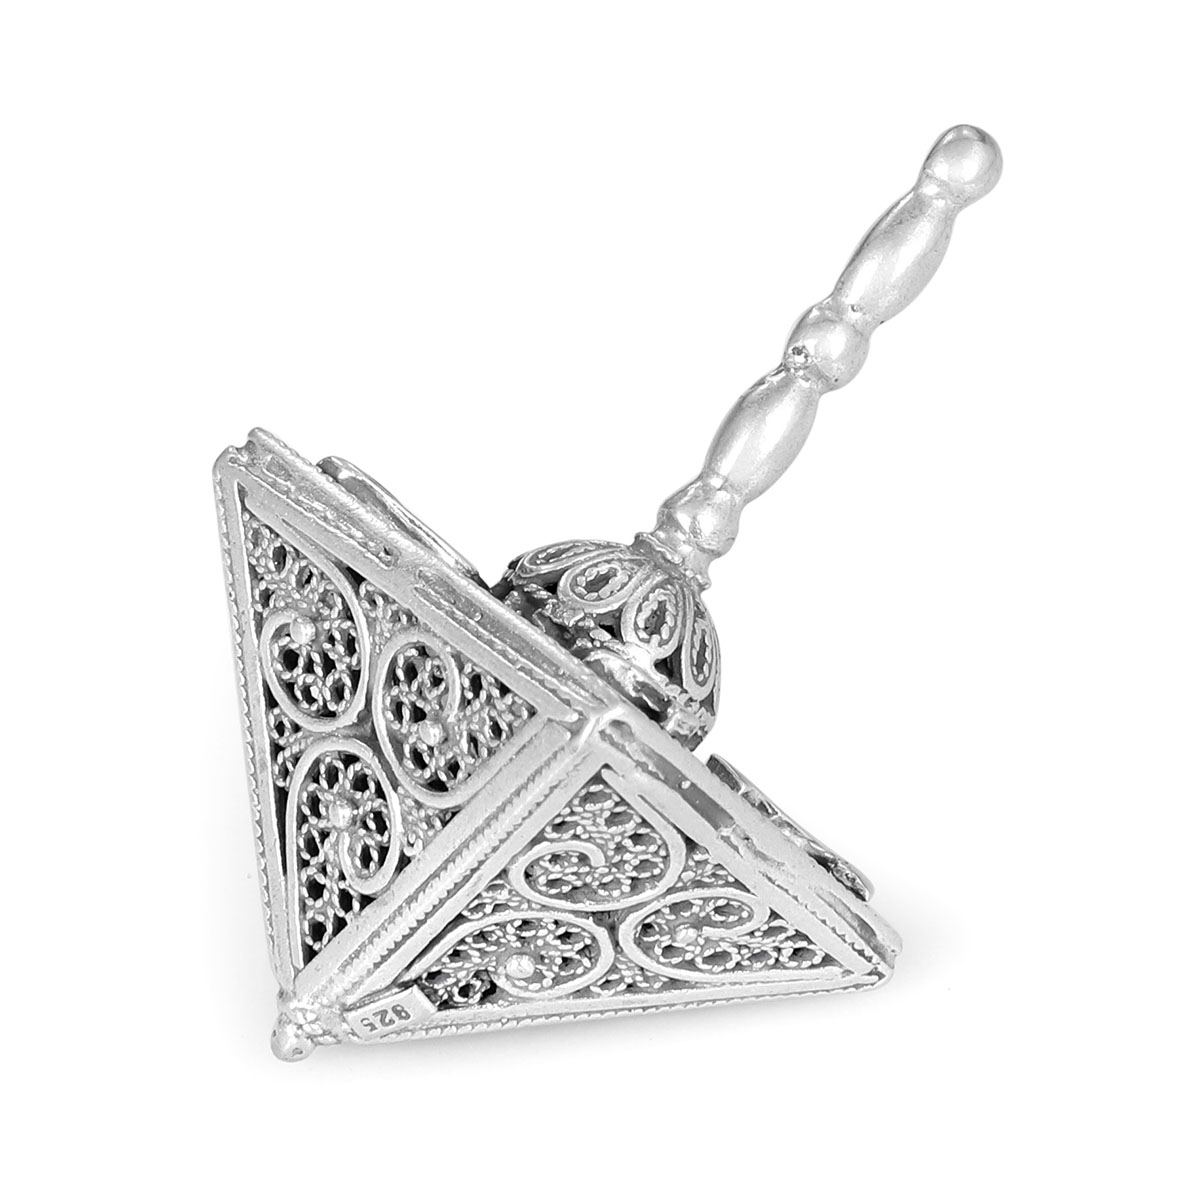 Traditional Yemenite Art Handcrafted Sterling Silver Tapered Dreidel With Filigree Design - 1